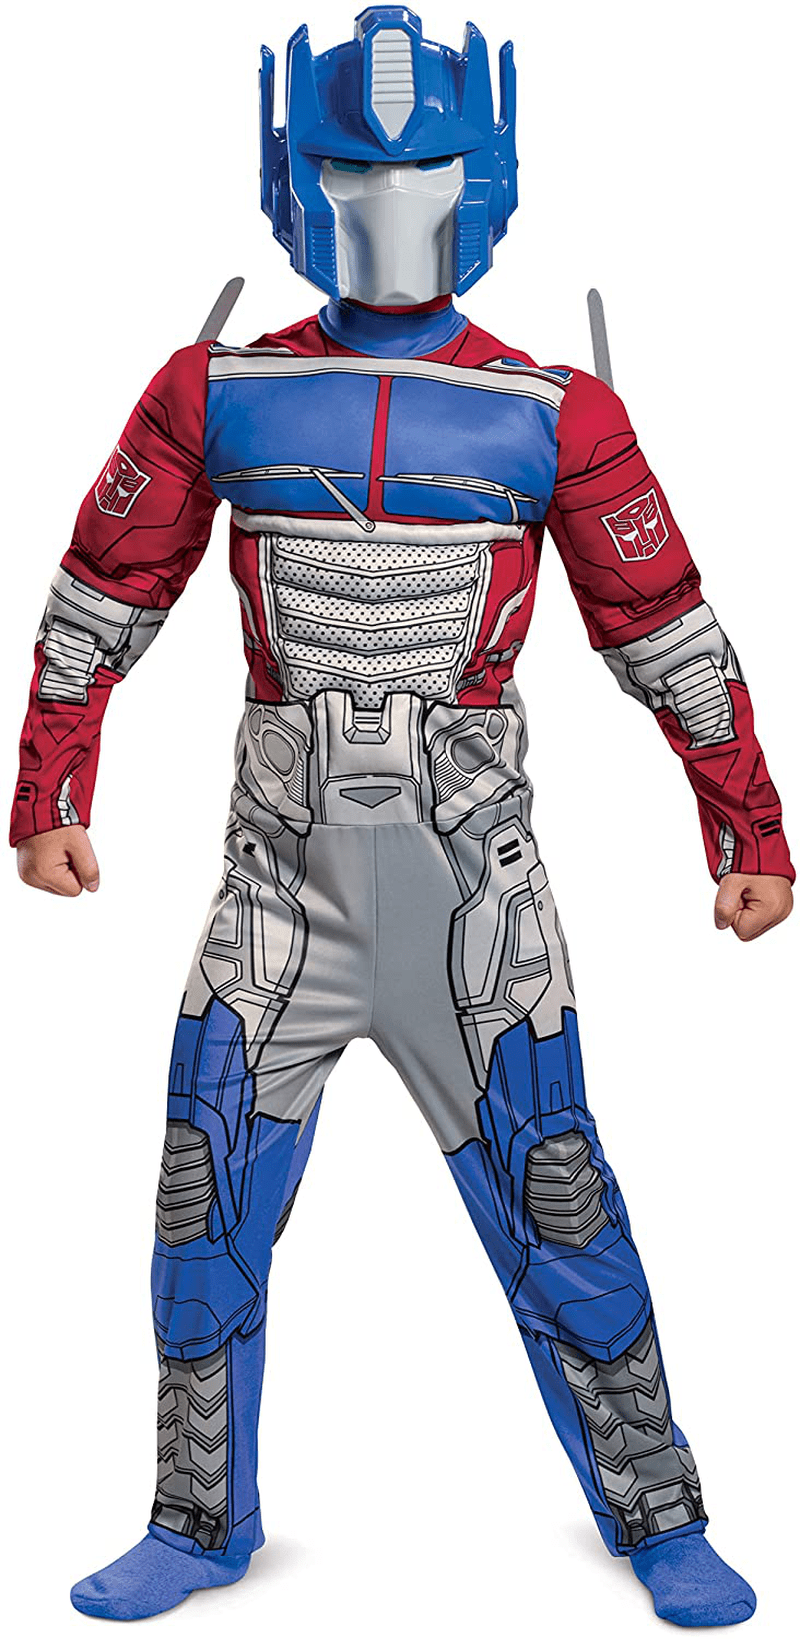 Transformers Muscle Optimus Prime Costume for Kids Apparel & Accessories > Costumes & Accessories > Costumes Disguise Optimus Prime Small (4-6) 